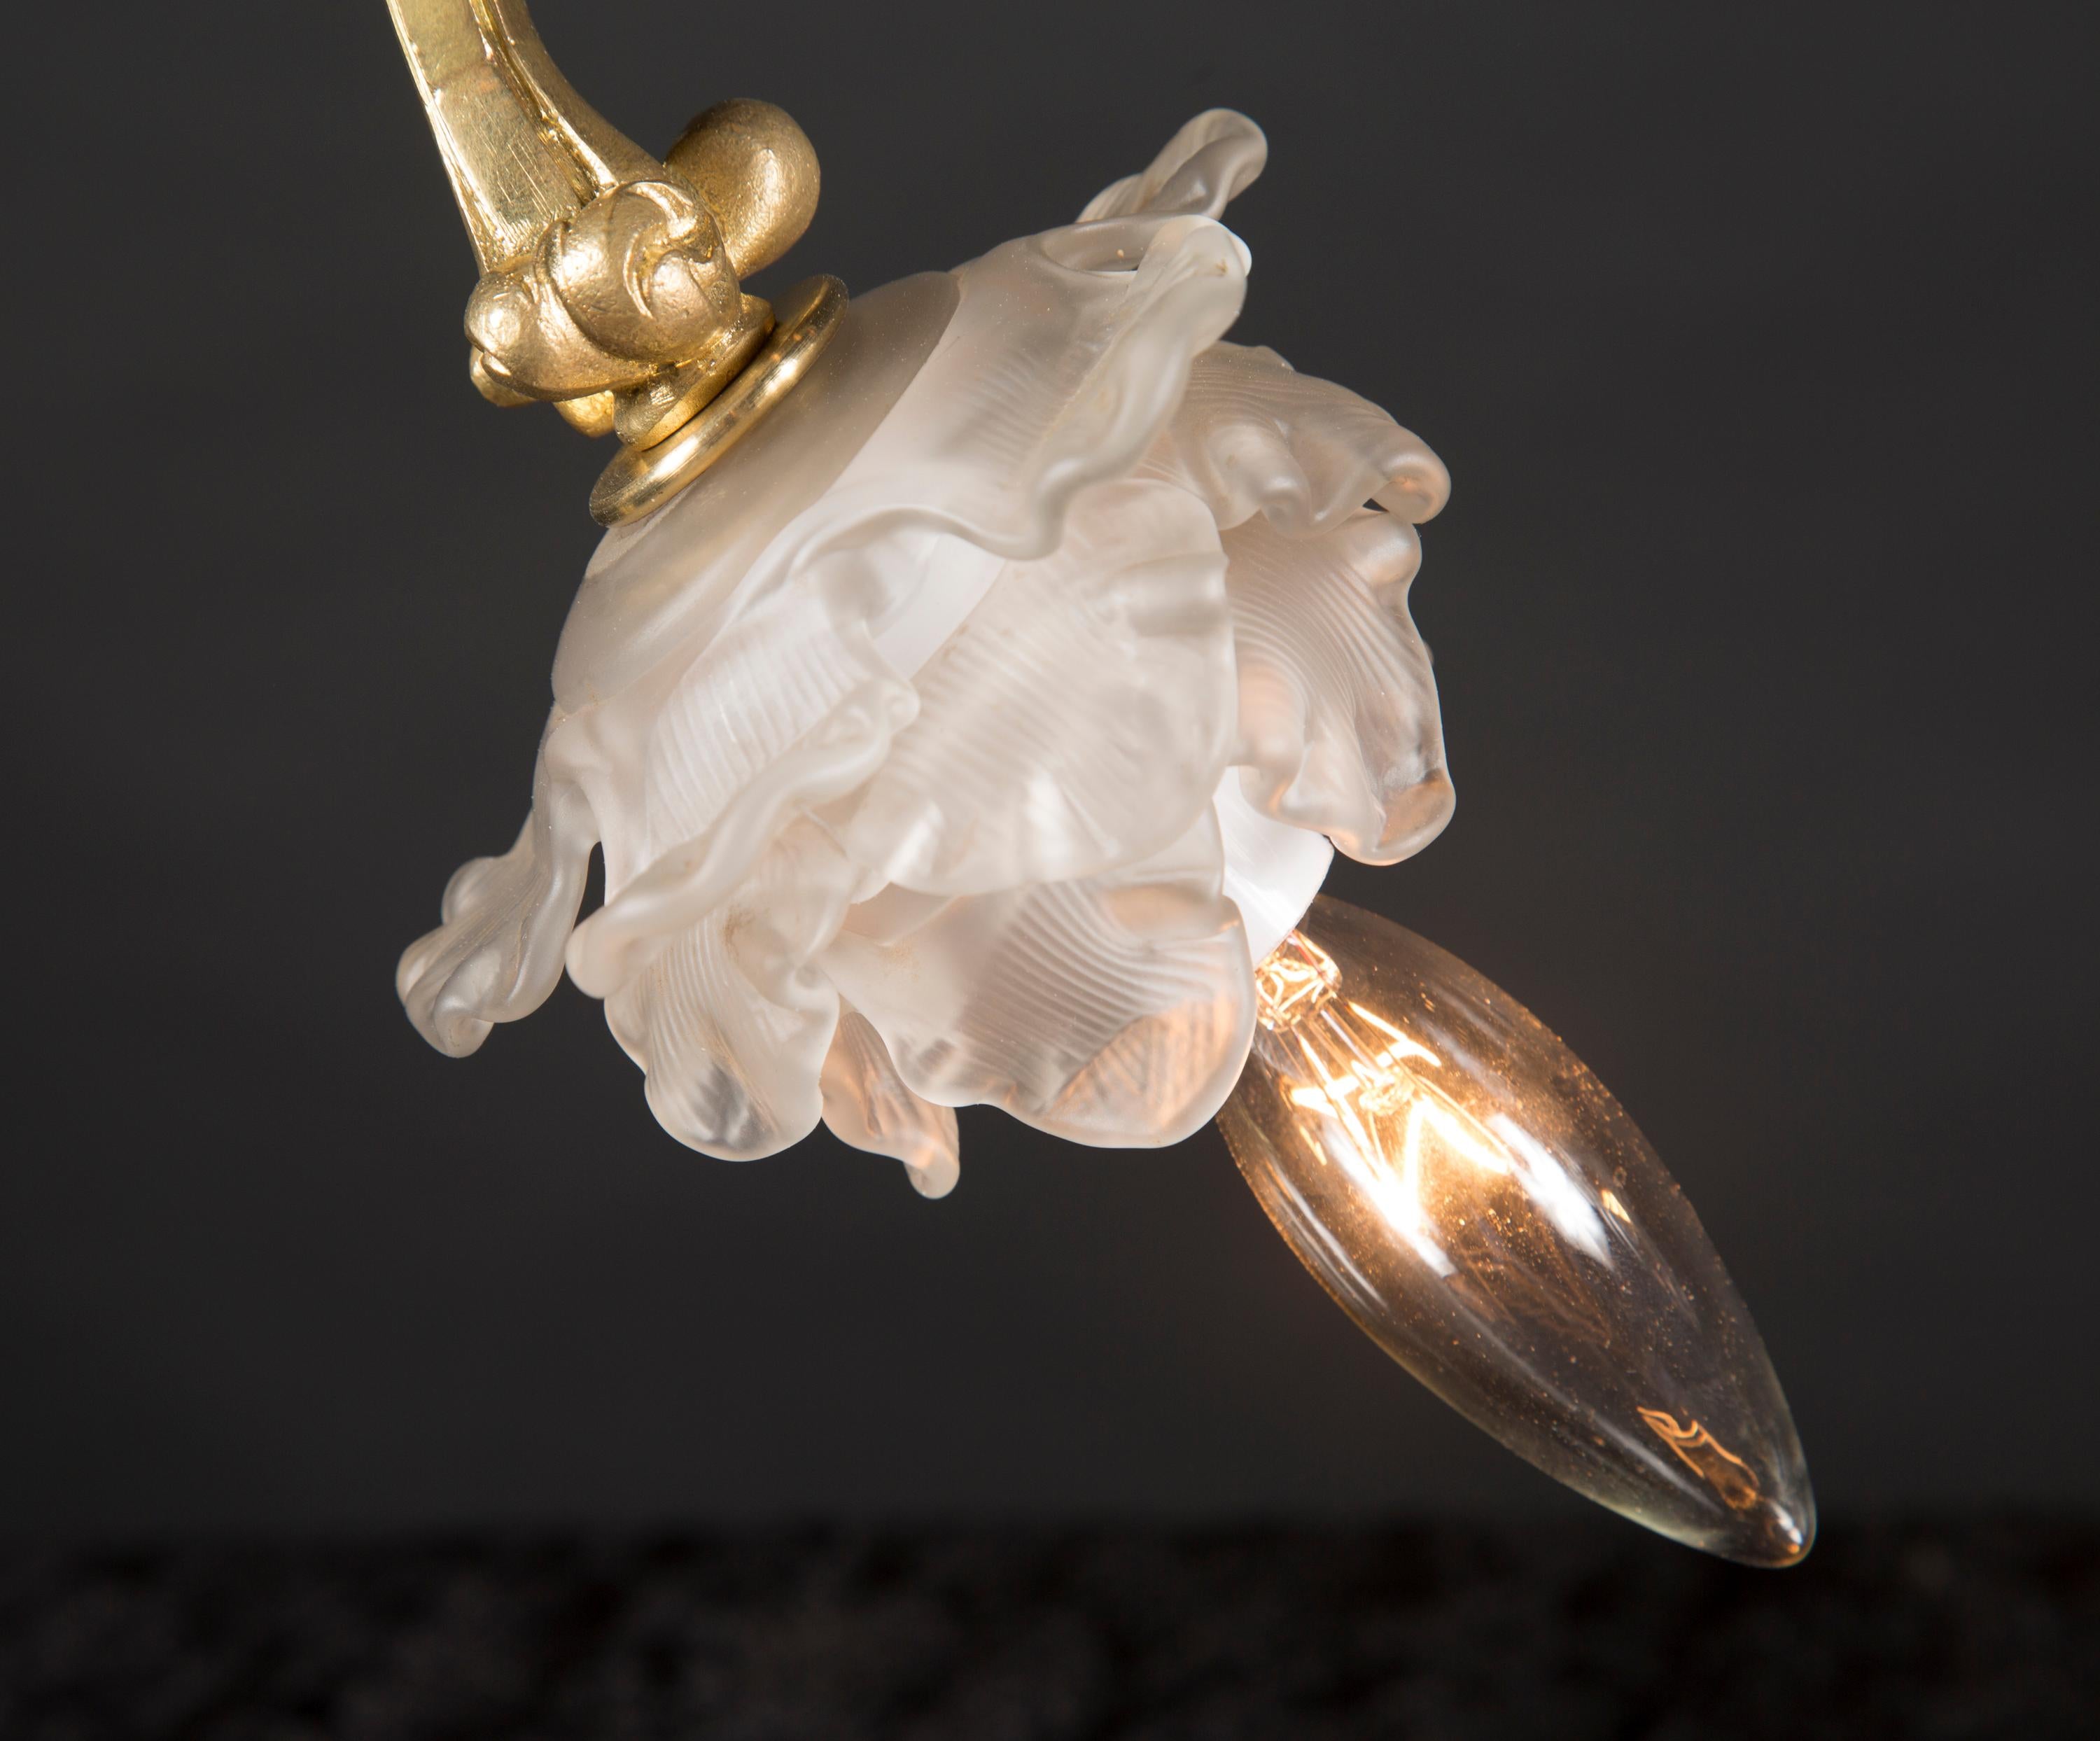 These elegant art nouveau single light lamps come directly from France and date back to the late 19th century. Their shape is magnificent, mirroring the curious lines of nature, and they feature delicate acanthus leaves along the steam with a